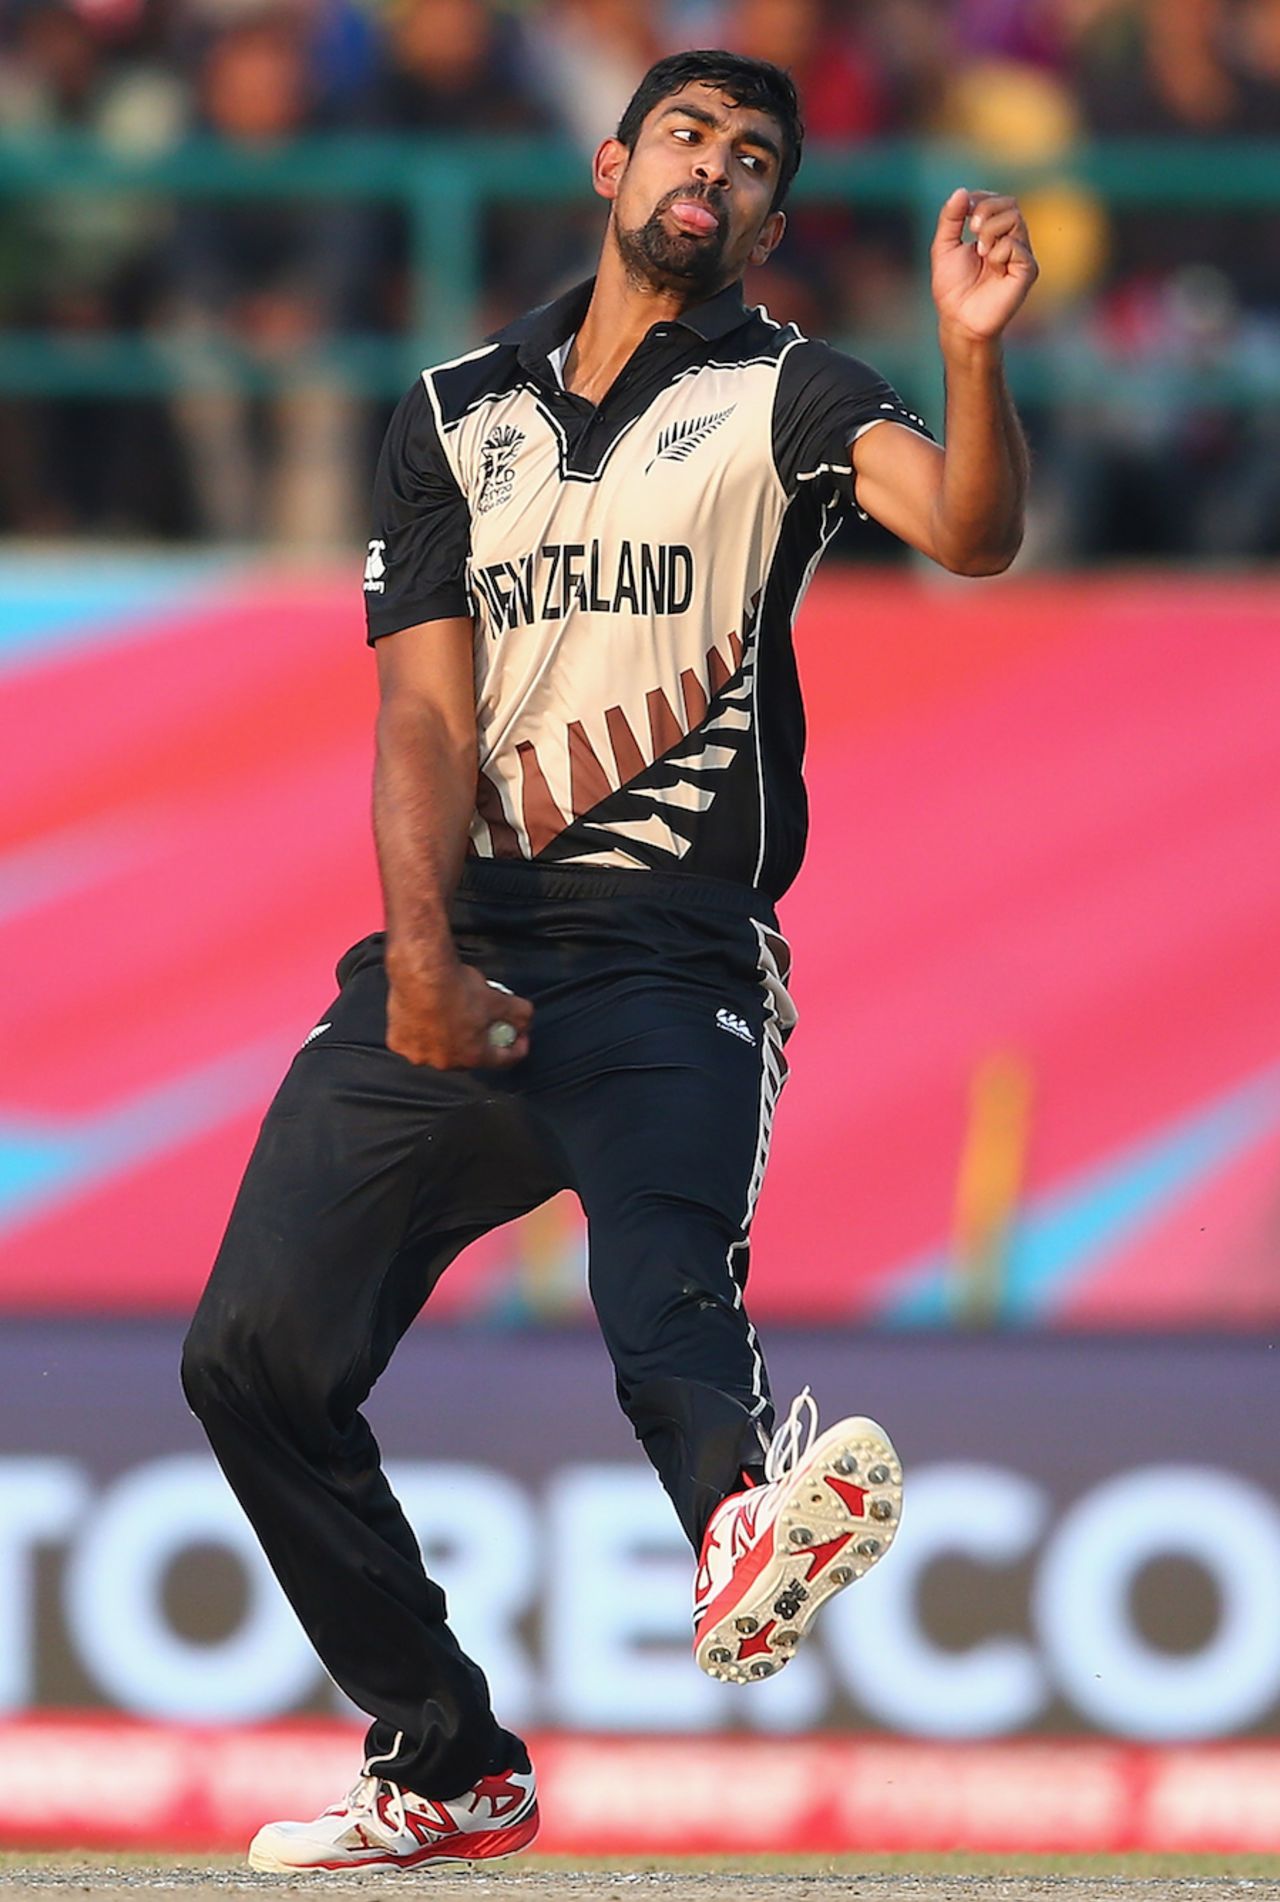 Ish Sodhi bowled a stifling spell of 4-0-14-1, Australia v New Zealand, World T20 2016, Group 2, Dharamsala, March 18, 2016